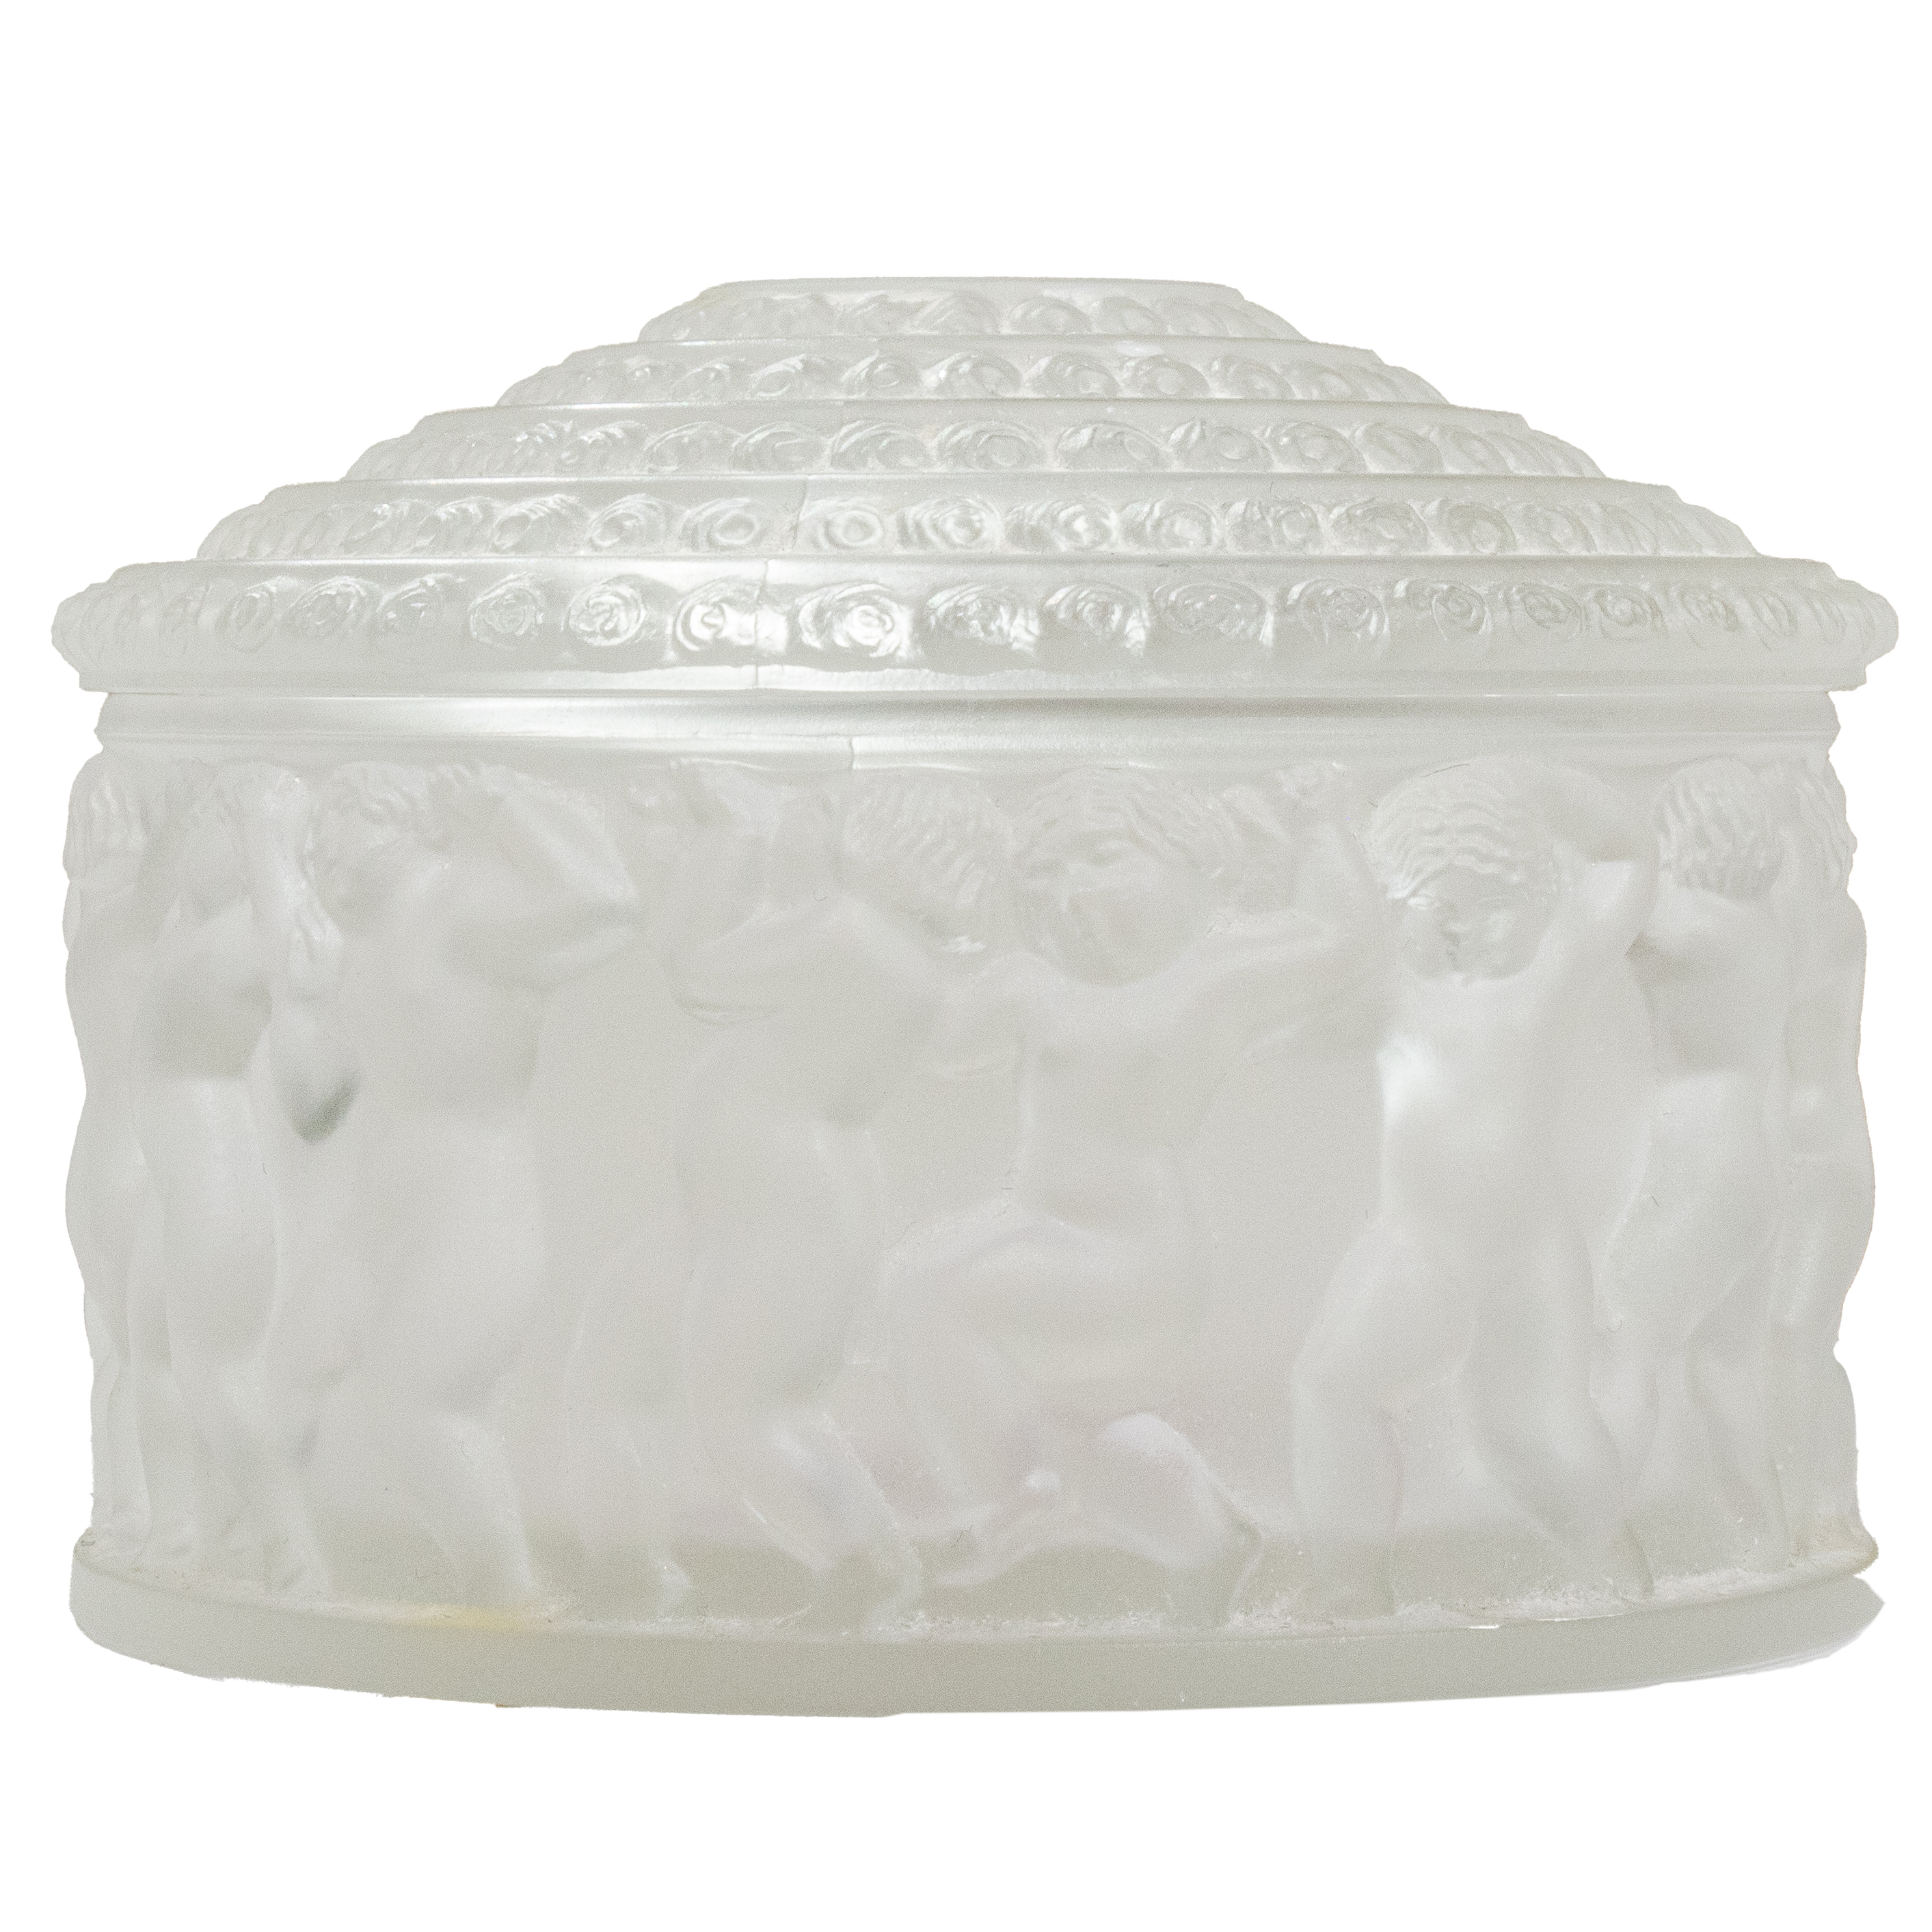 A LALIQUE GLASS POWDER BOX IN THE 3ce3ac